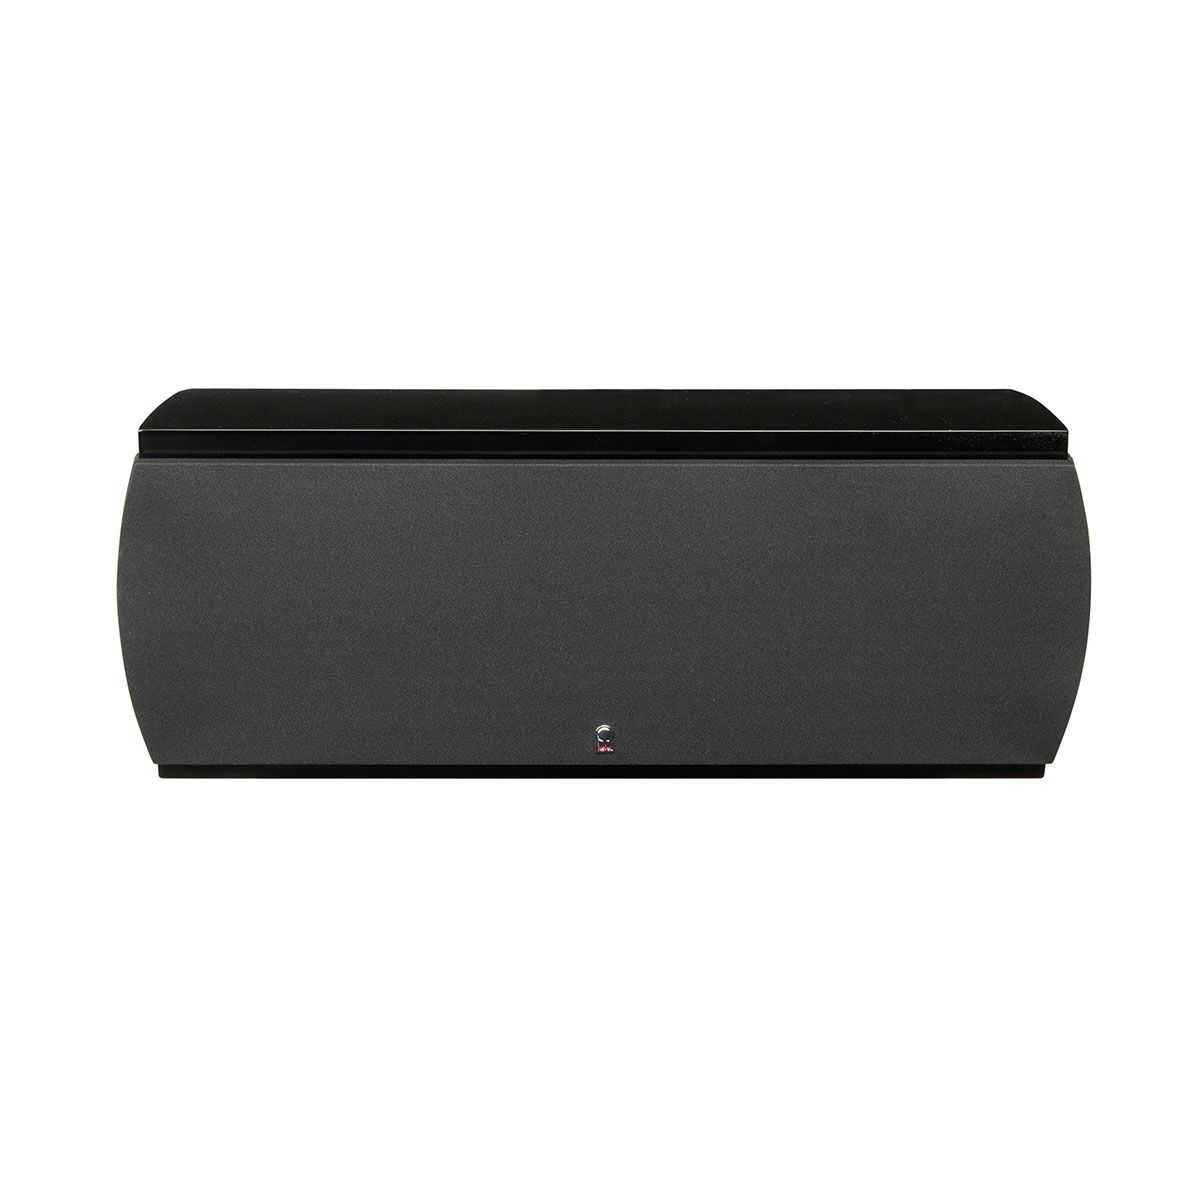 Revel C205 2-way Center Channel Loudspeaker - Black with grille - front view